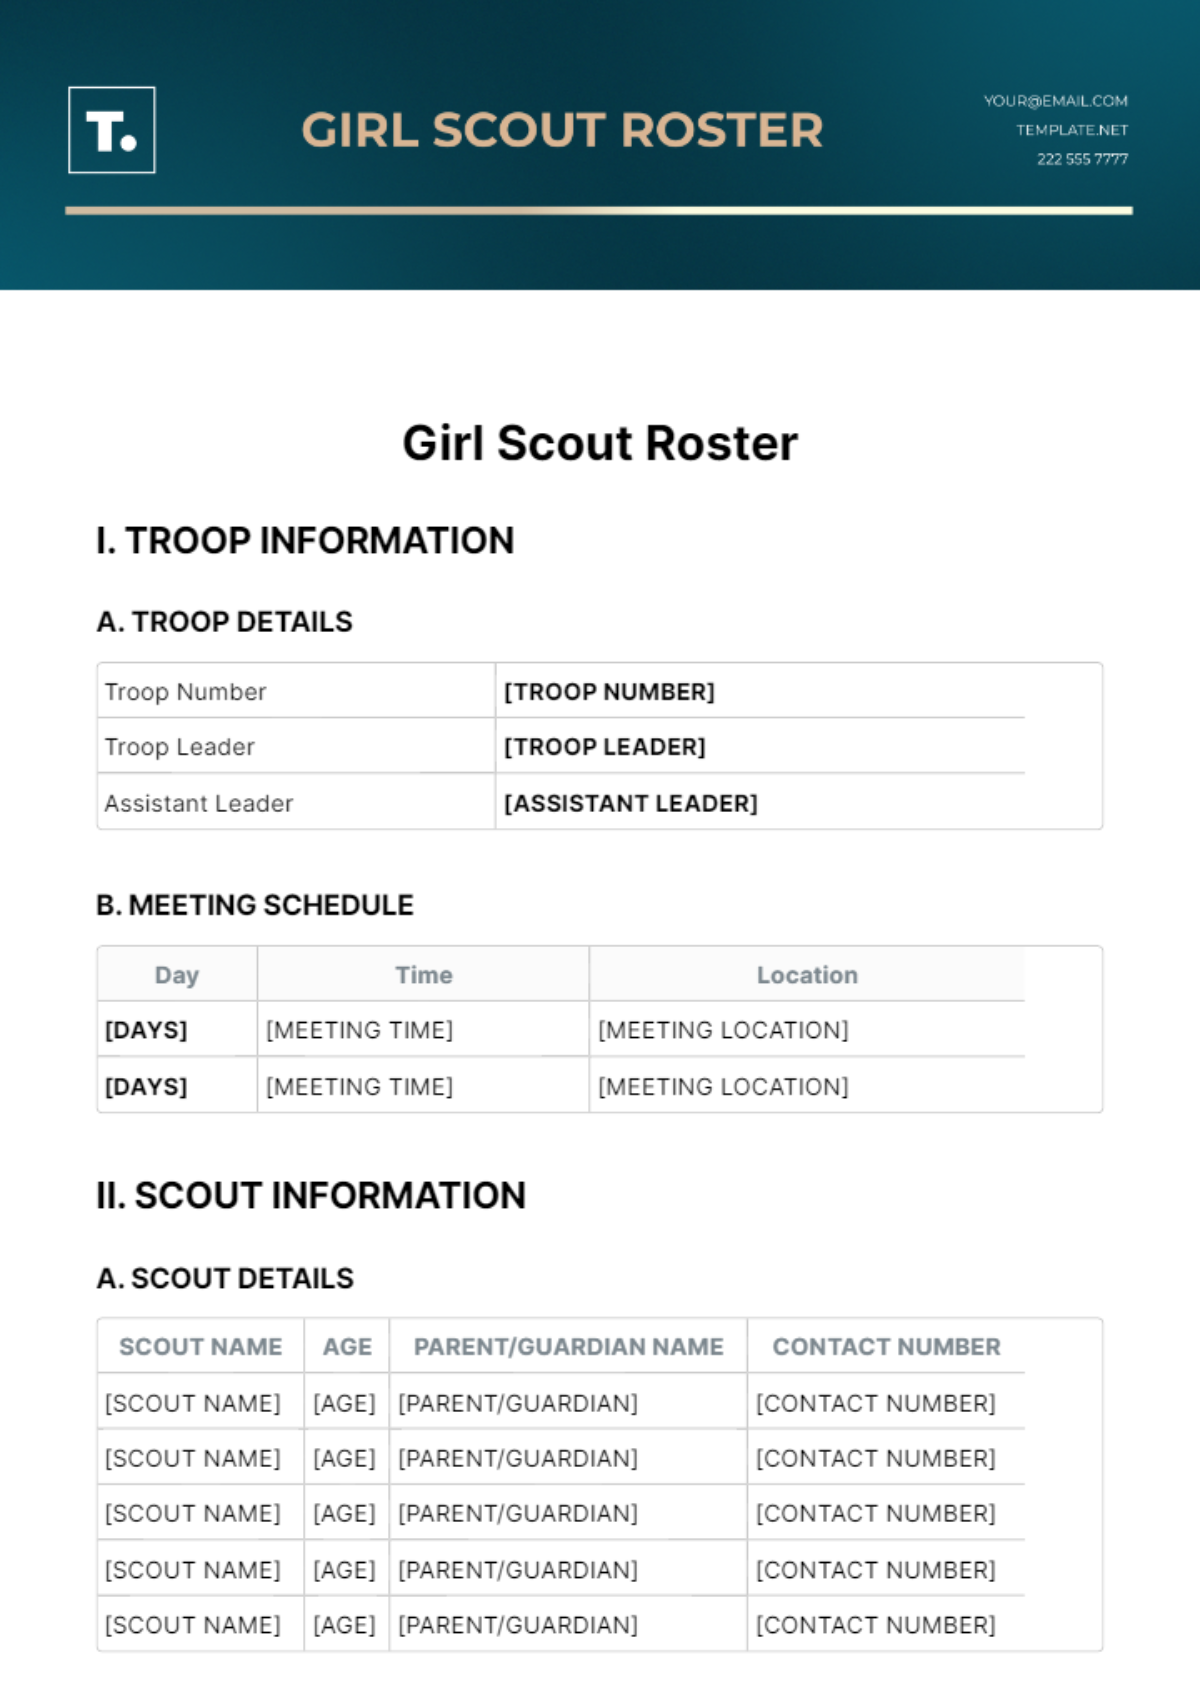 Girl Scout Roster Template